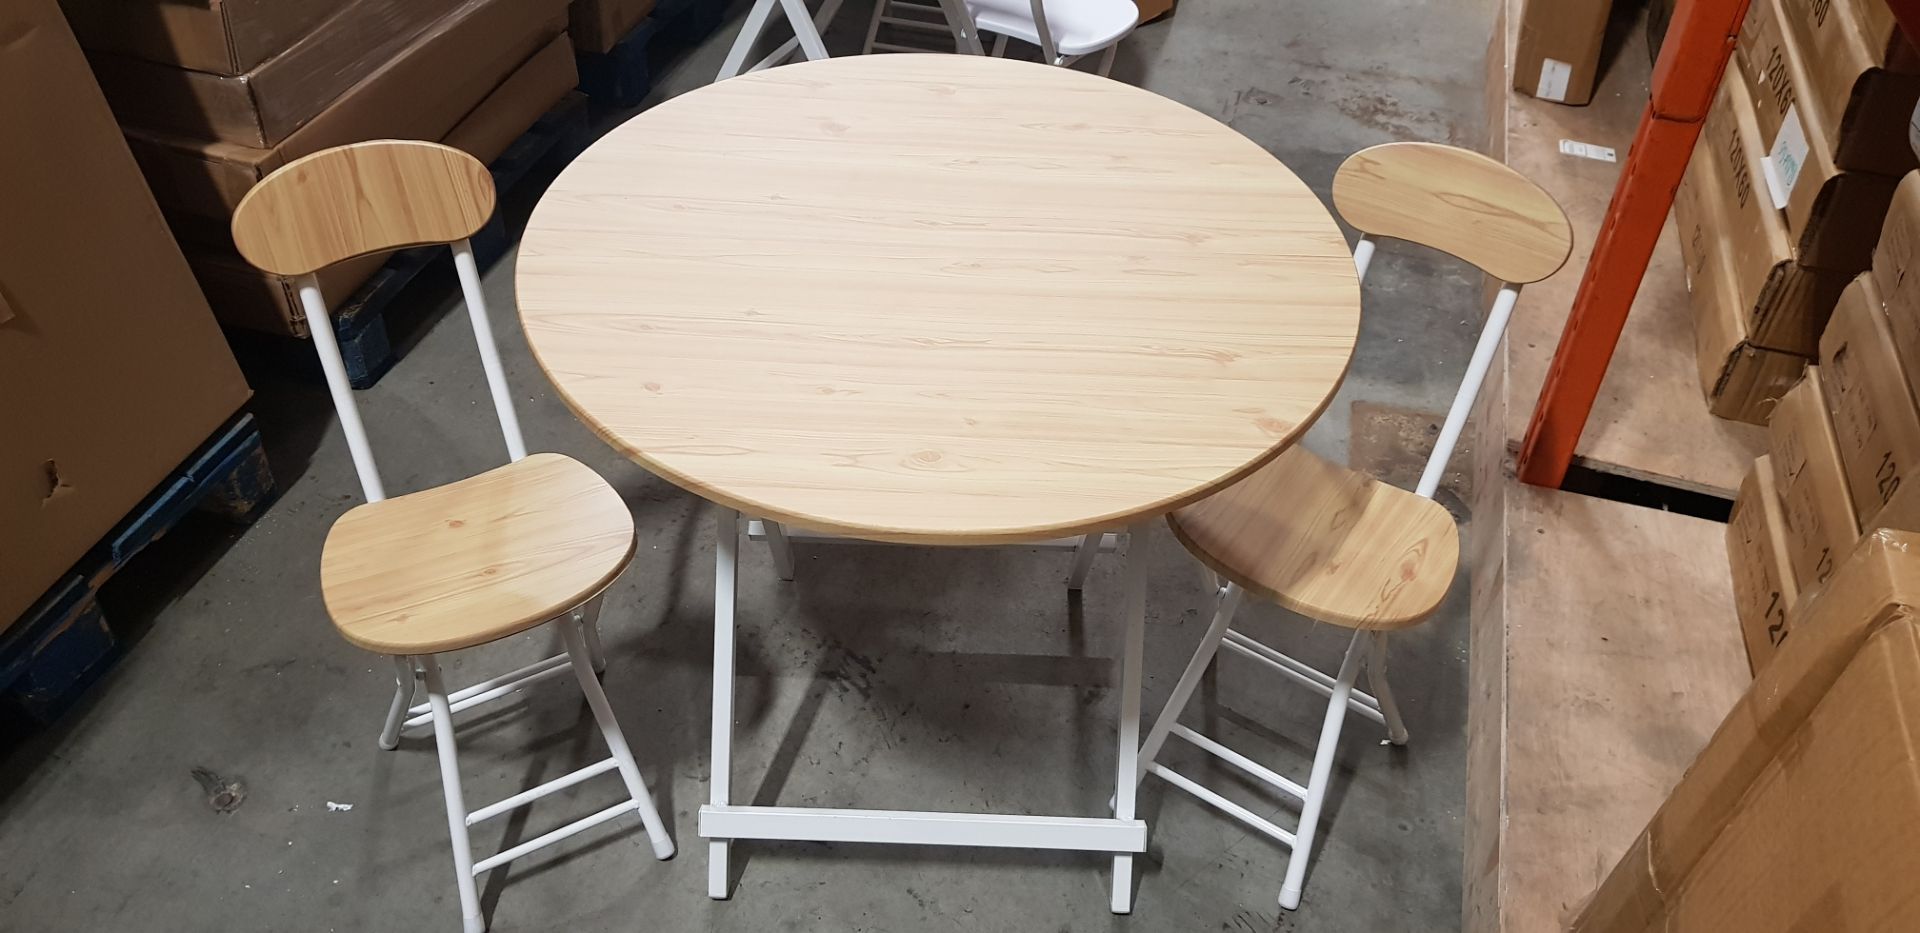 2 X OAK COLOURED ROUND TABLES DIAMETER 80CM AND 4 X OAK FOLDABLE CHAIRS (NOTE: FACTORY GRADED SOME